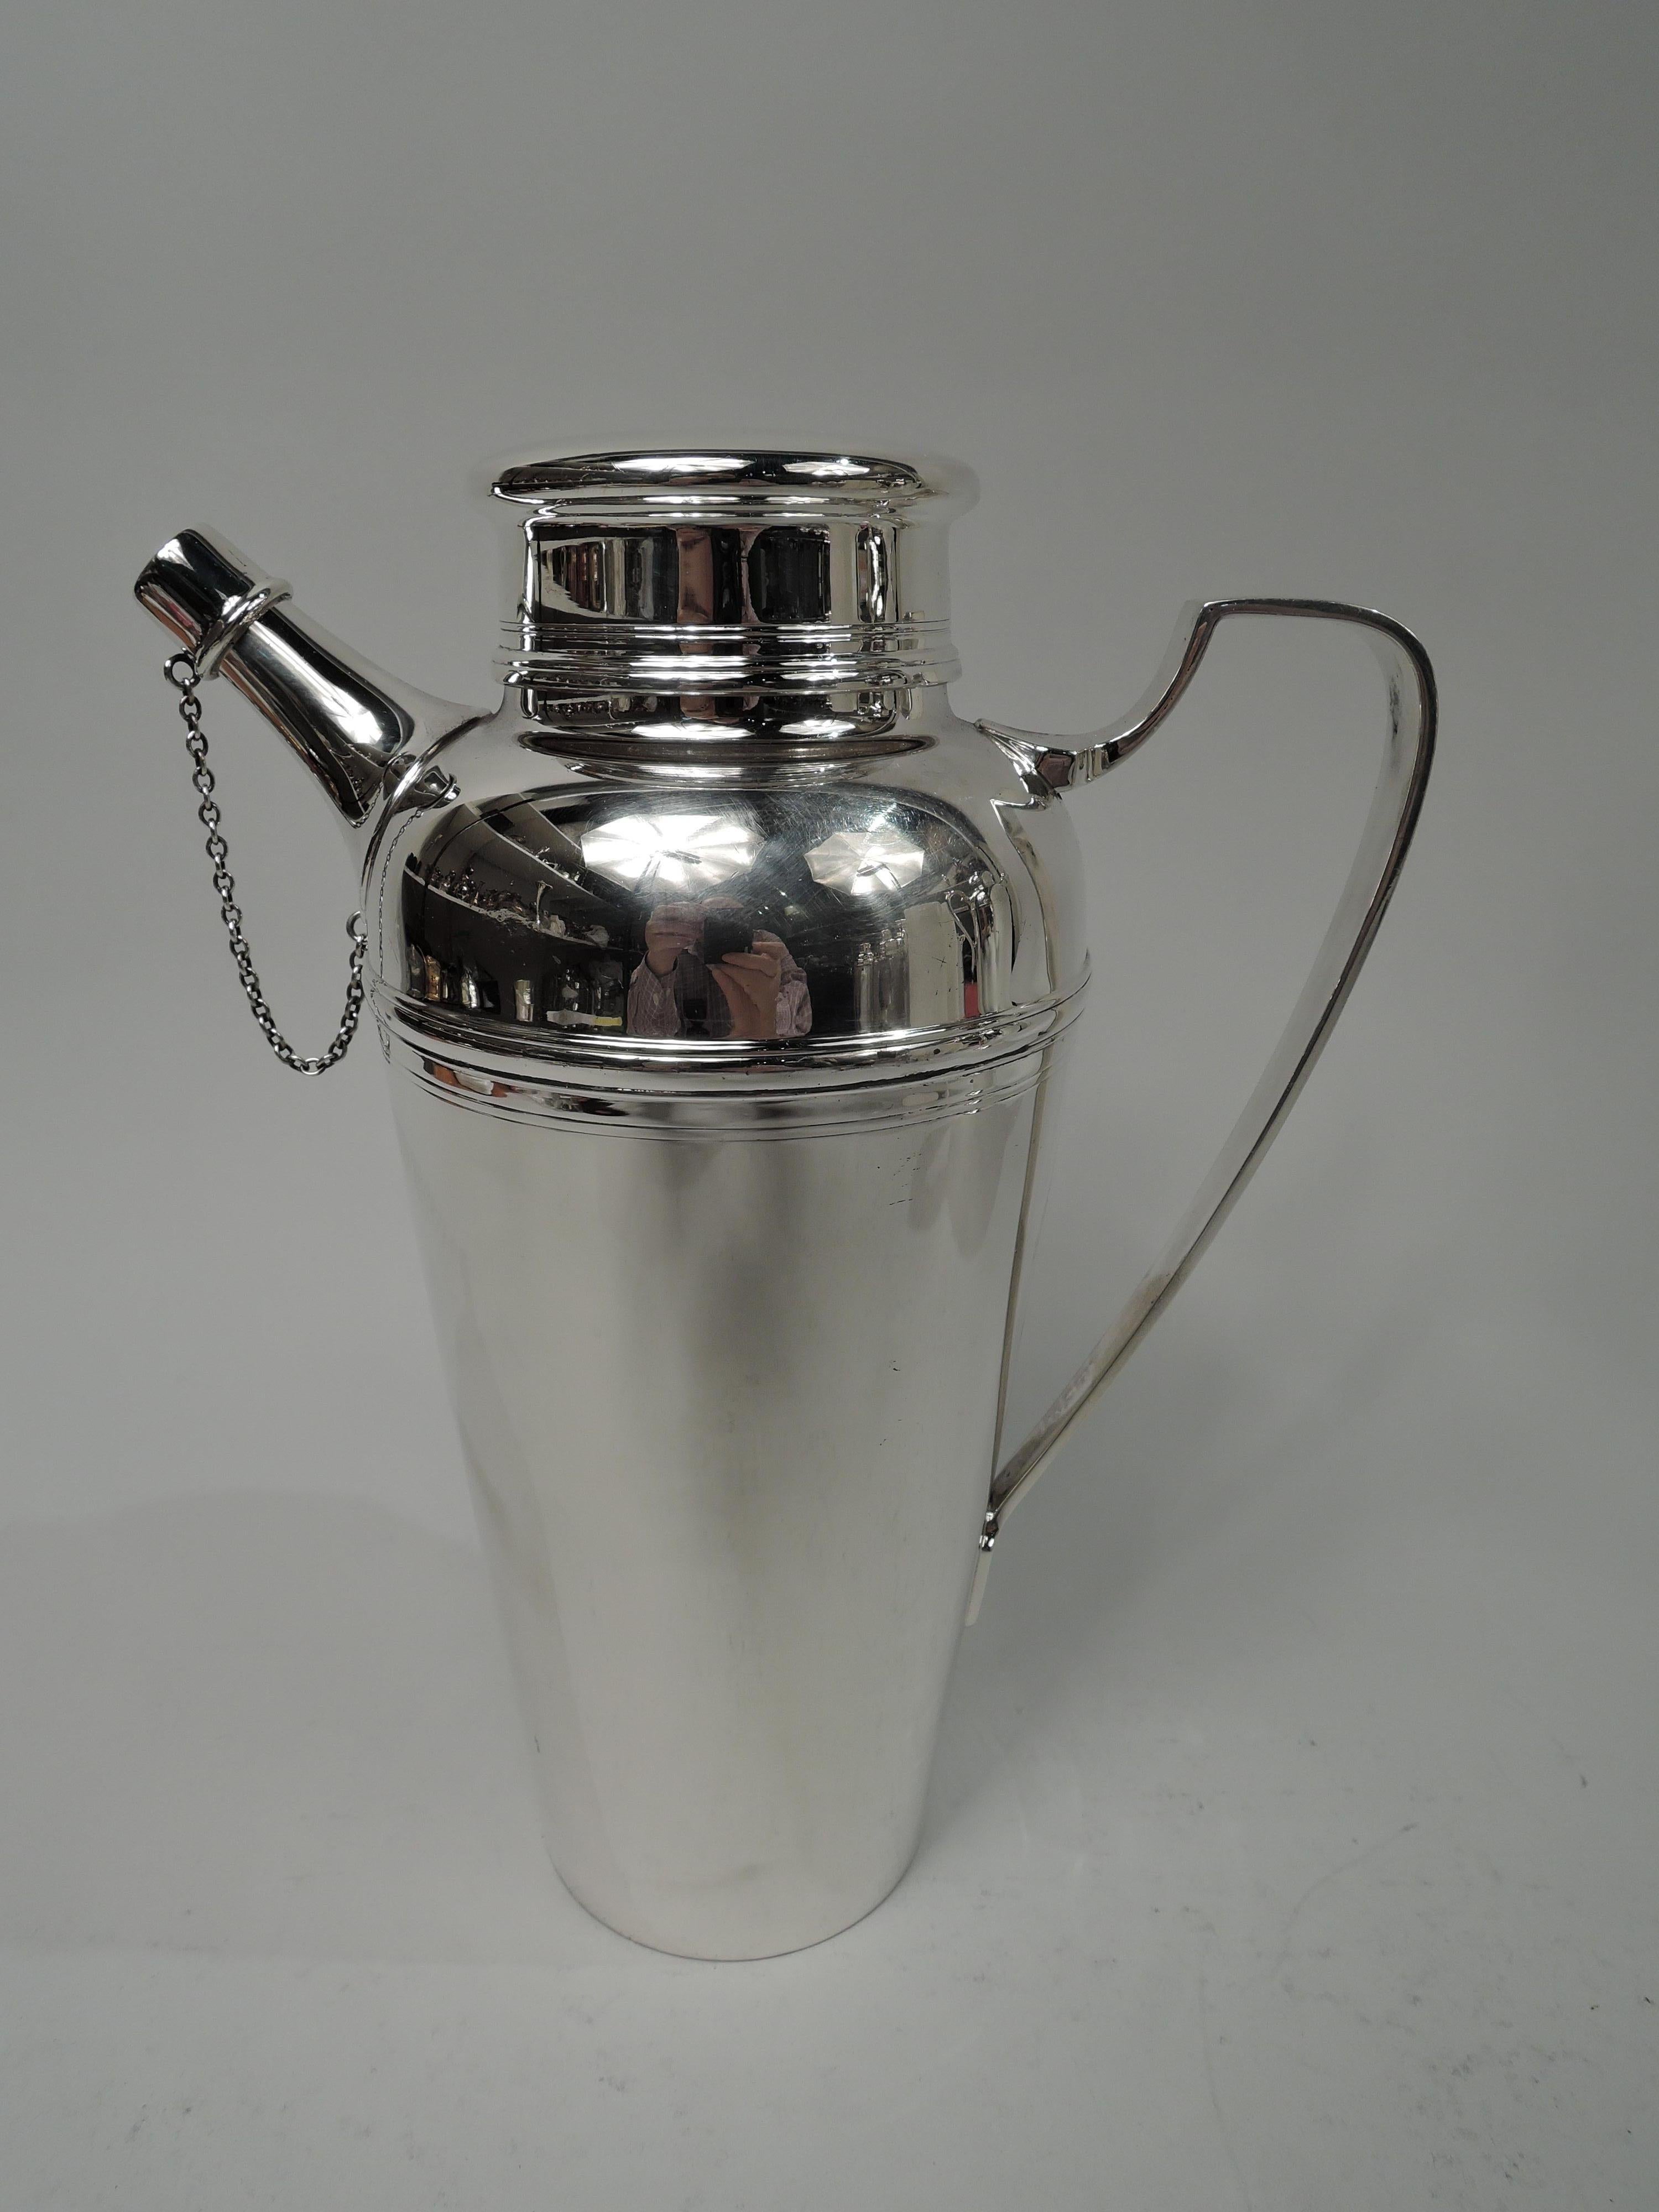 Art Deco sterling silver cocktail shaker. Made by Tiffany & Co. in New York, ca 1925. Straight and tapering bowl with curved shoulder, high bracket handle, short neck with overhanging flat-topped cover, and stubby, tapering spout with chained cap.